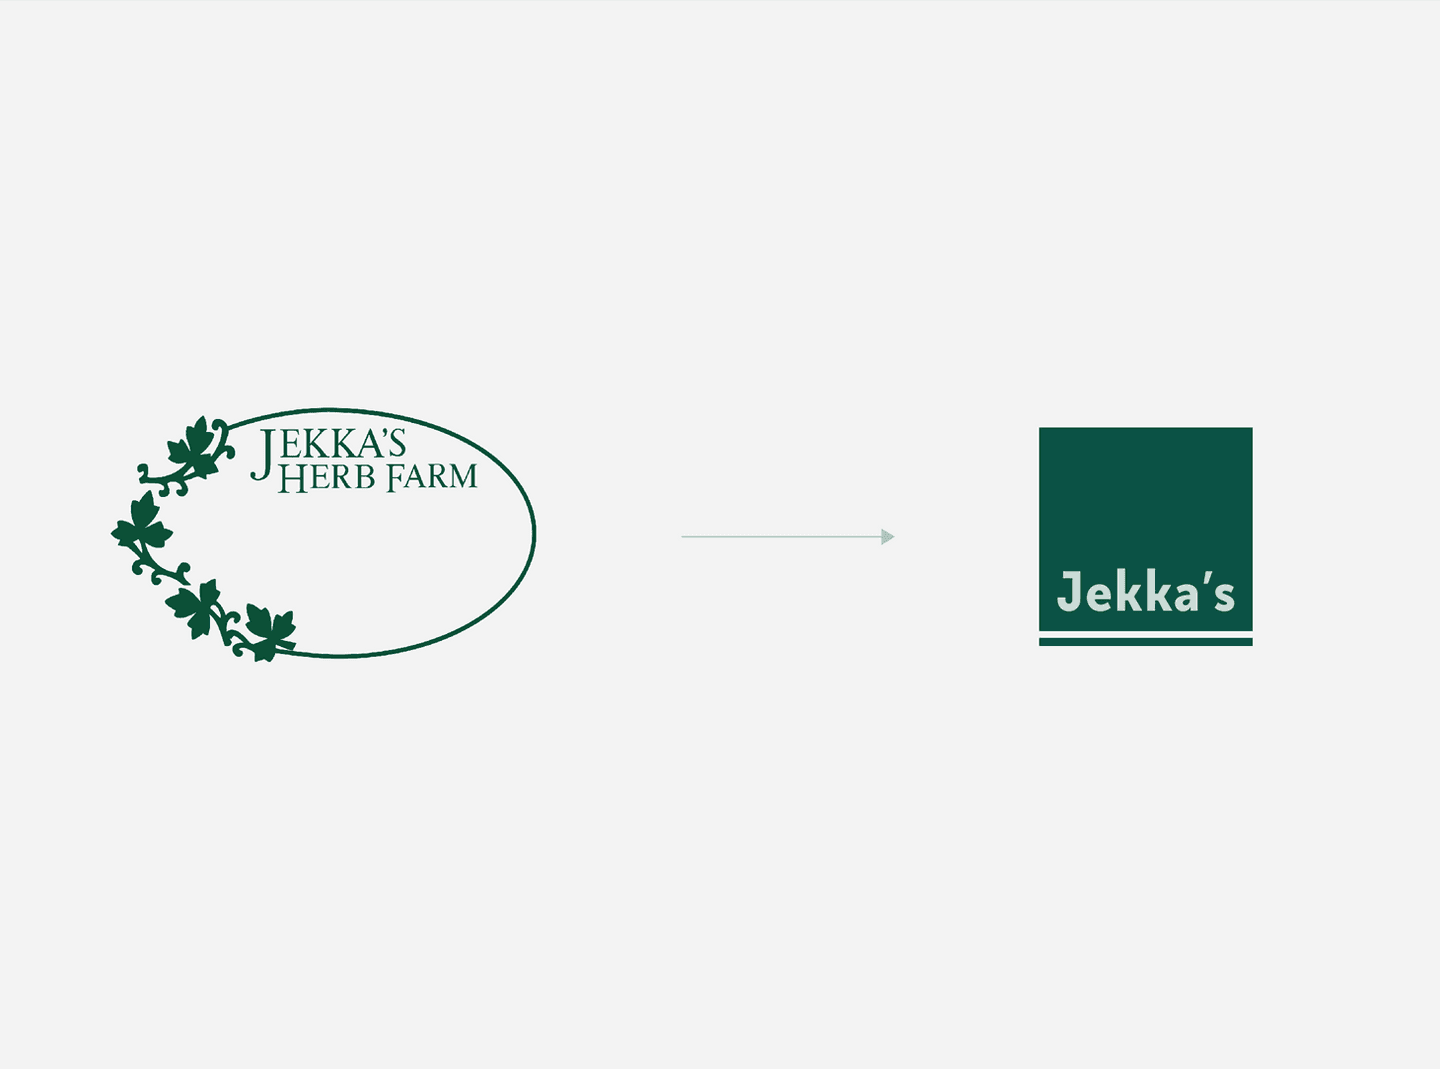 Jekka's logo, from old to new